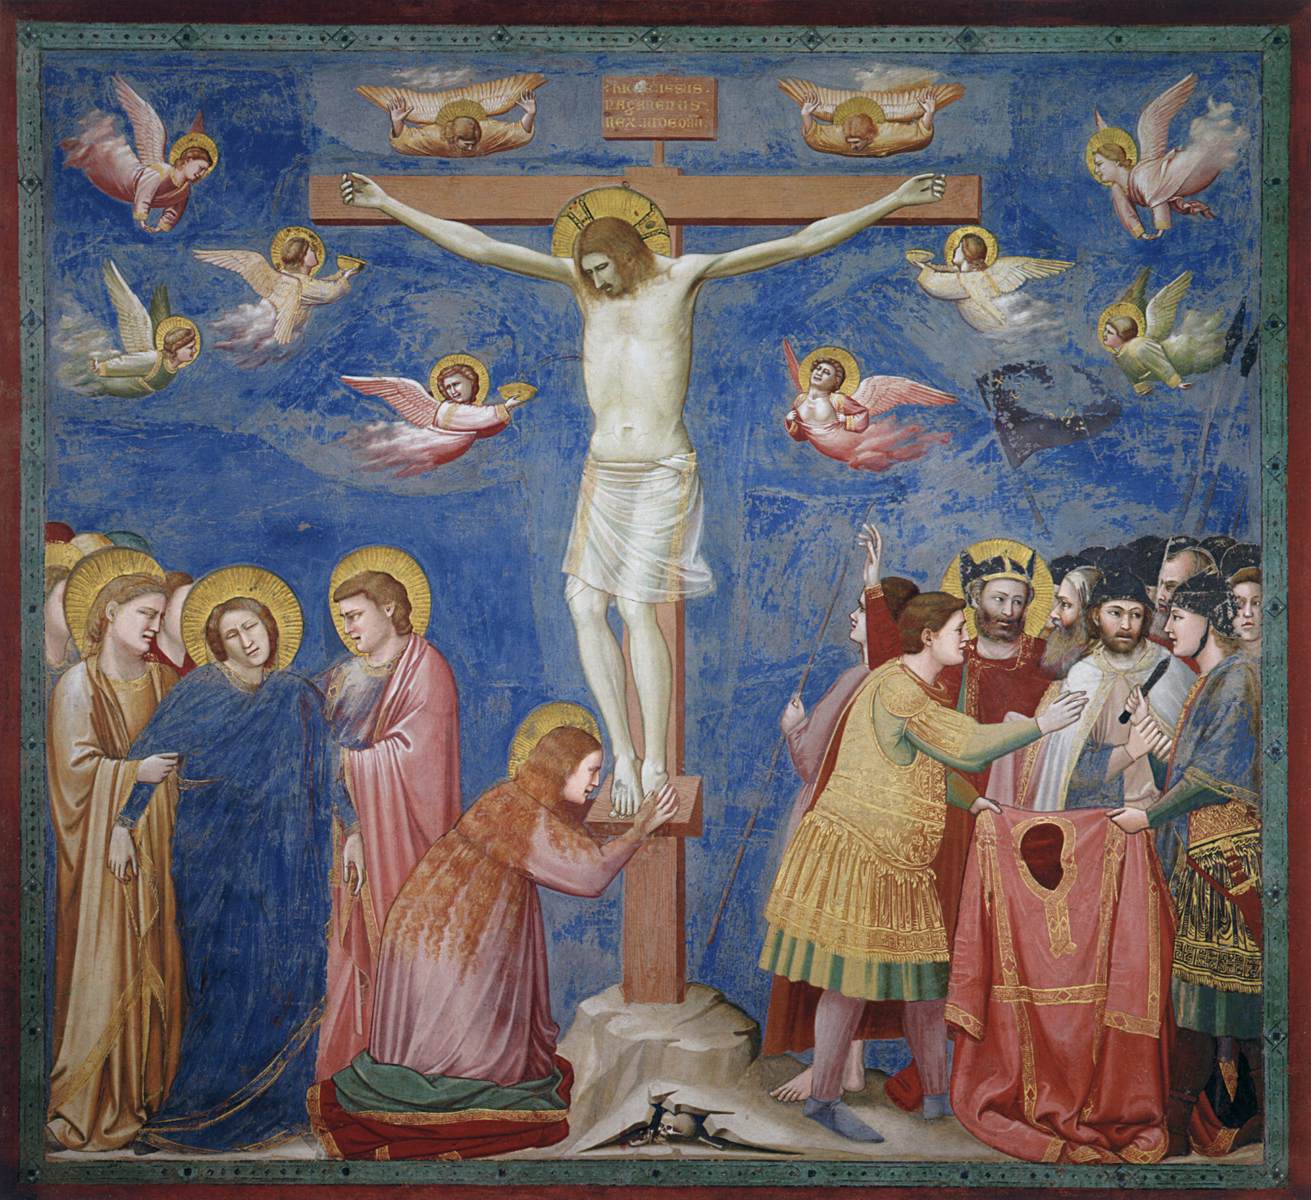 No 35 Scenes from the Life of Christ: 19 The Crucifixion